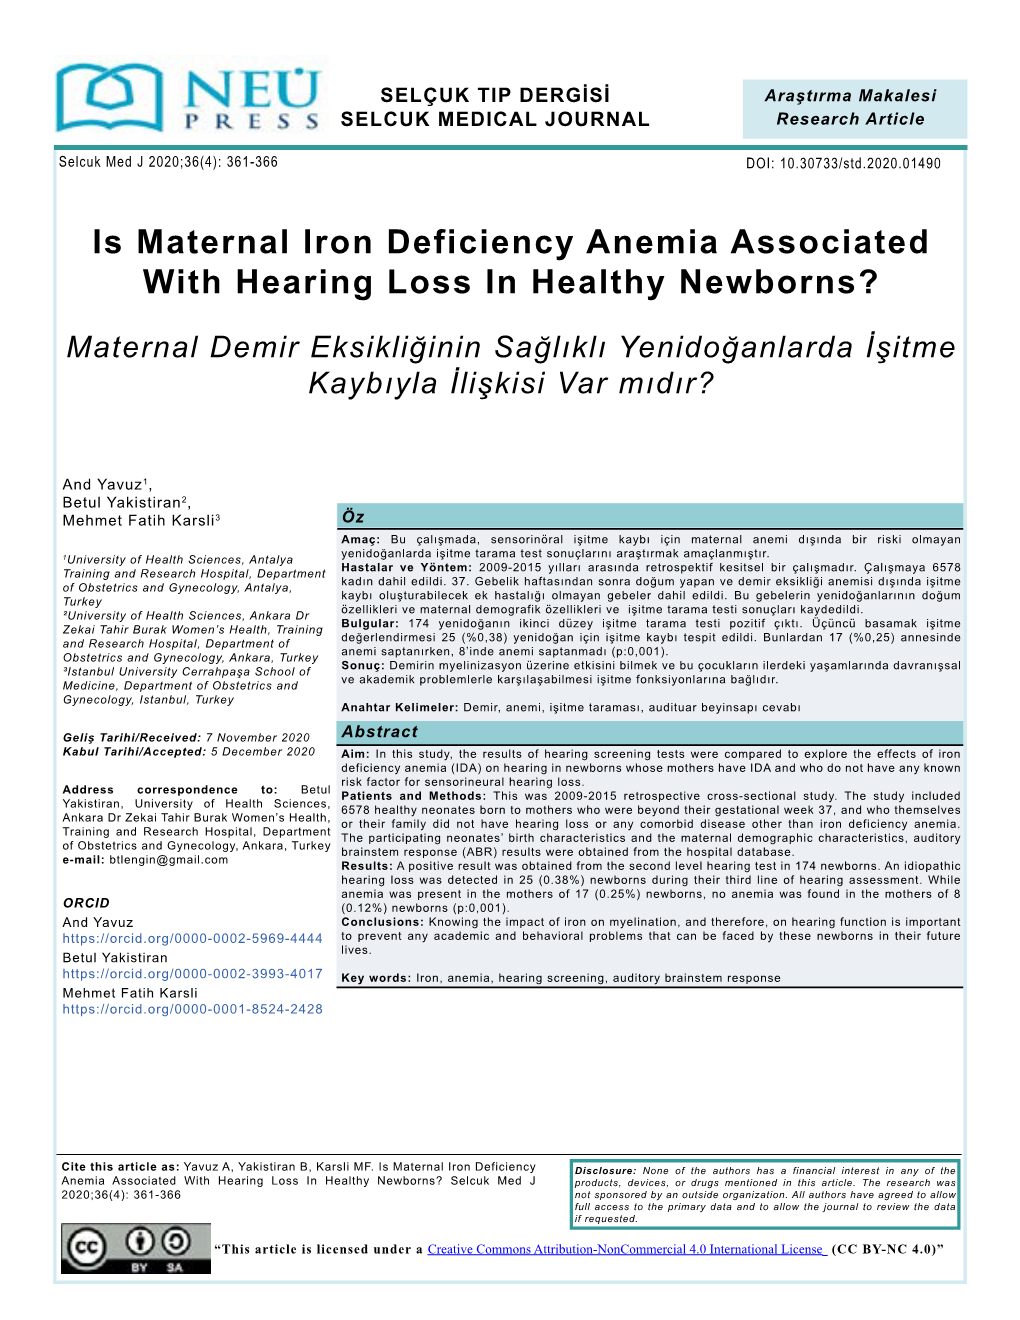 Is Maternal Iron Deficiency Anemia Associated with Hearing Loss in Healthy Newborns?